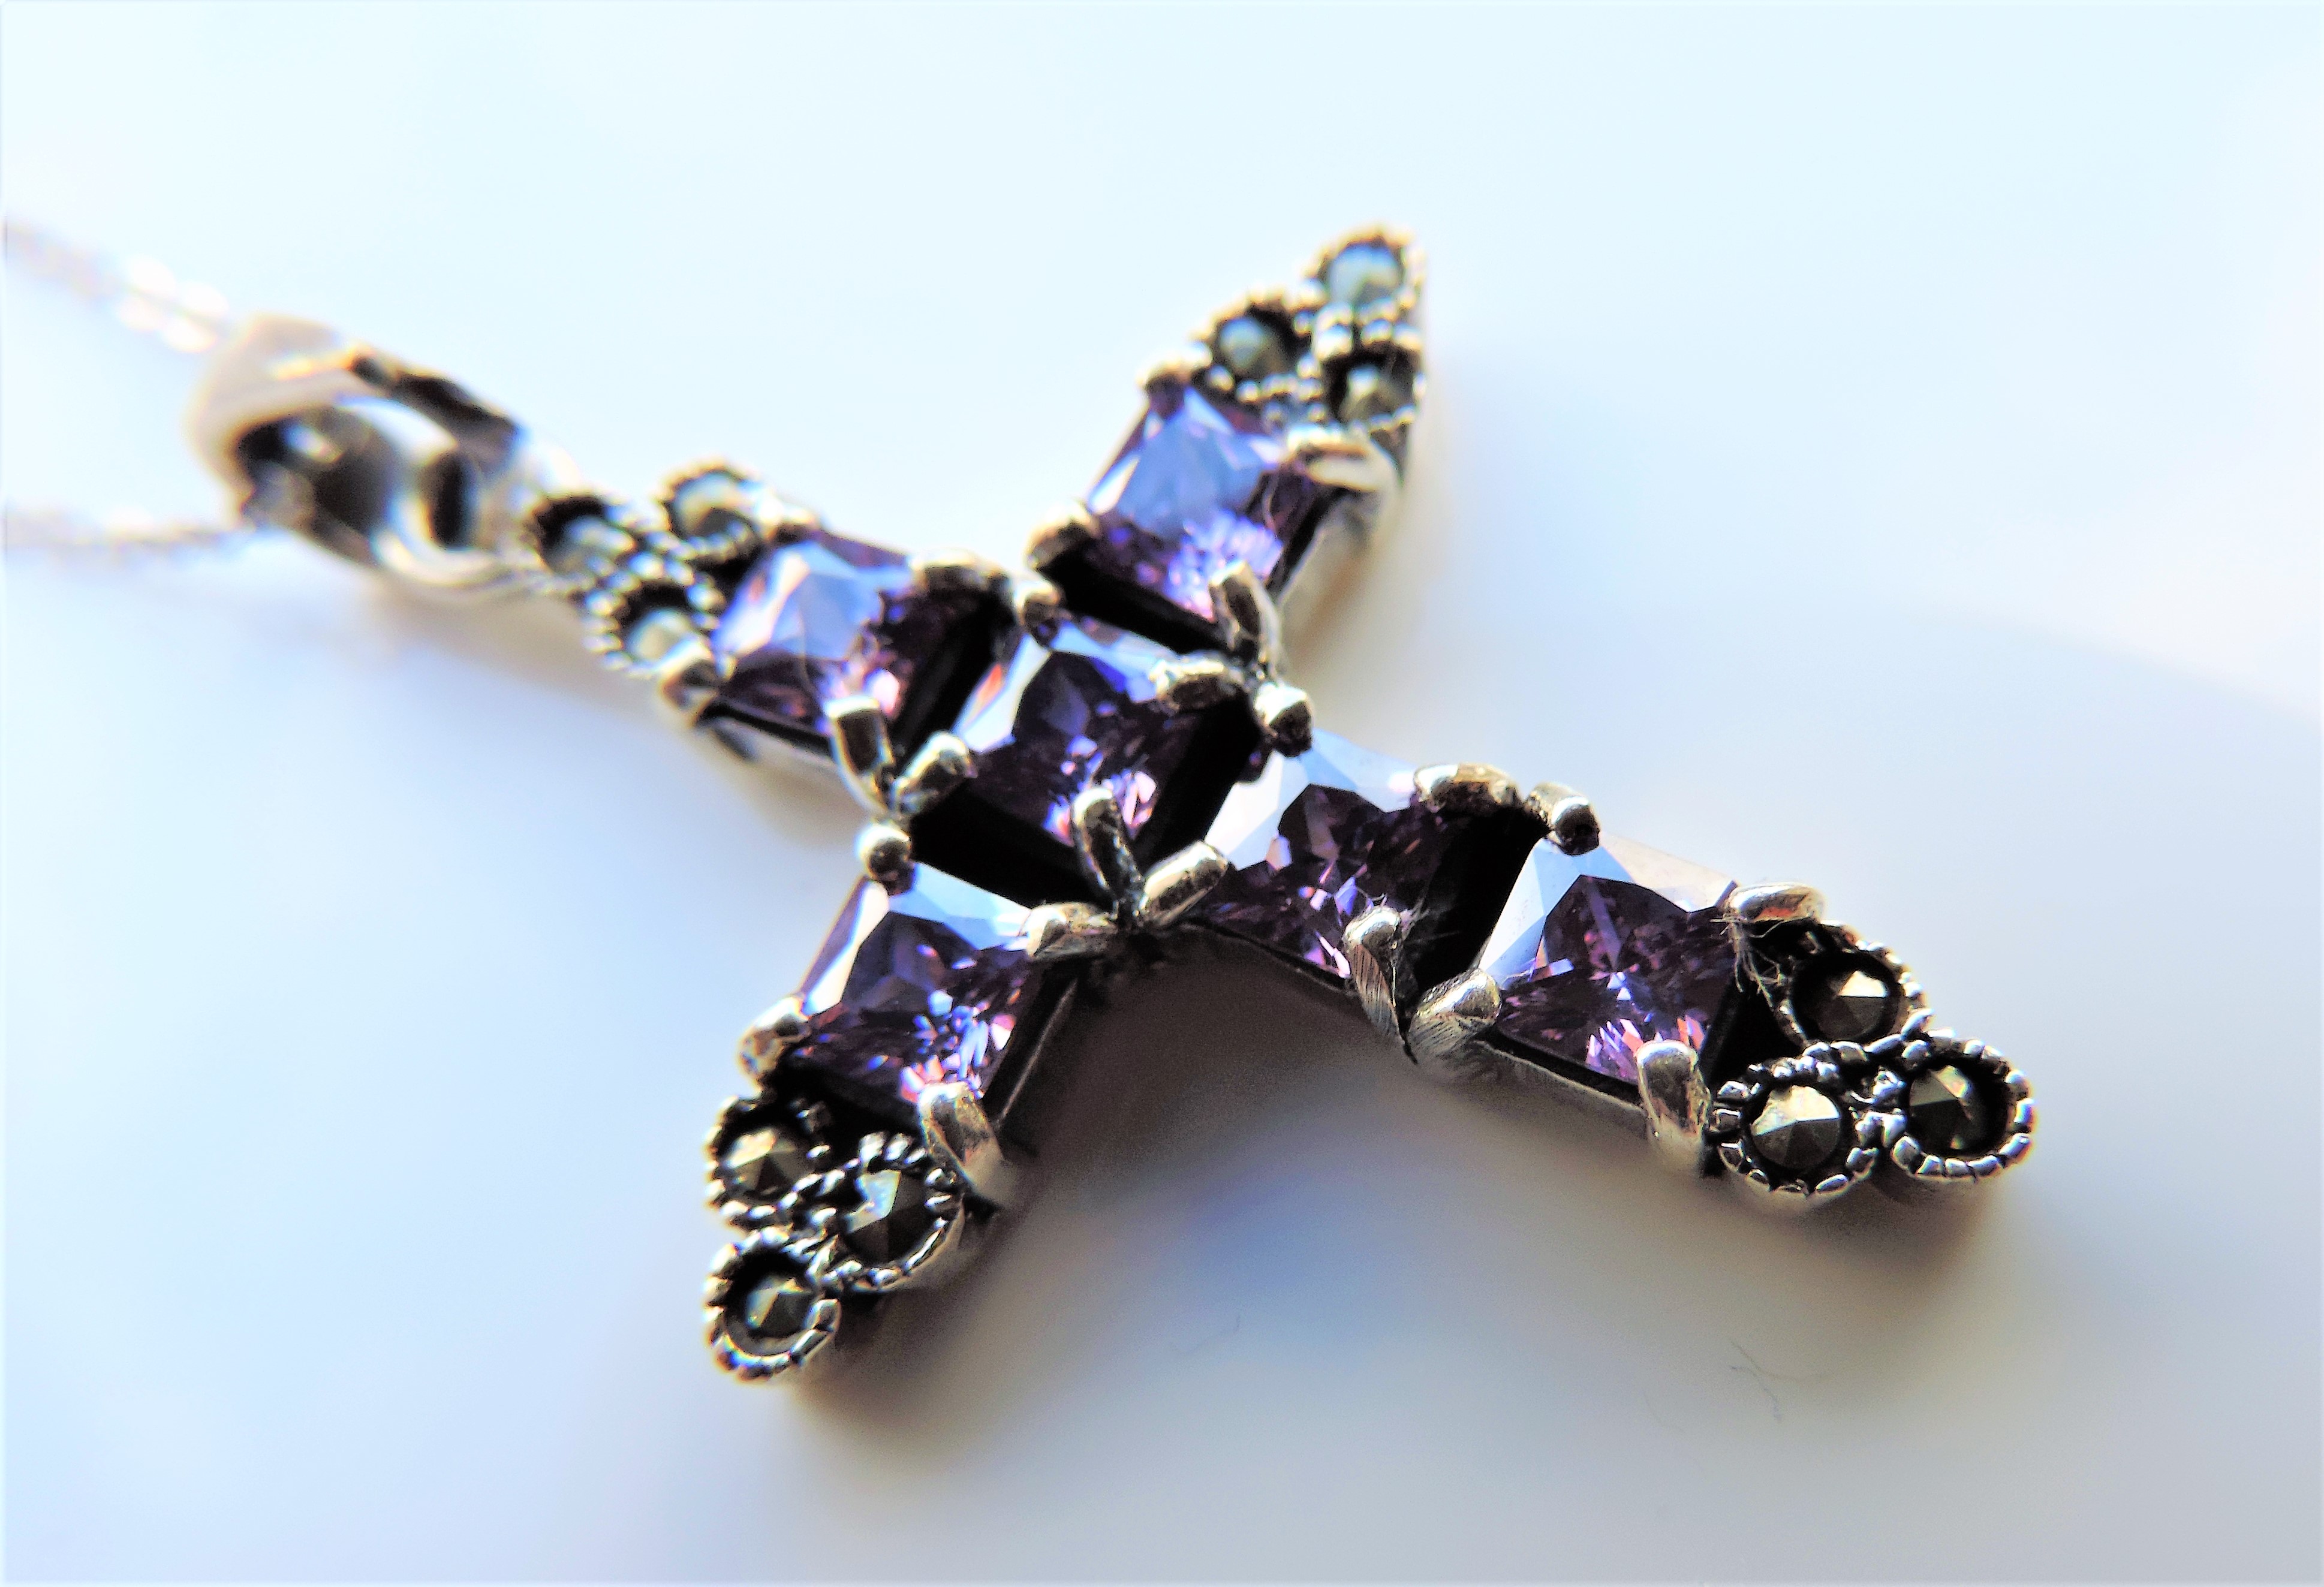 Sterling Silver 1.38 carat Amethyst & Marcasite Pendant Necklace - Image 3 of 4